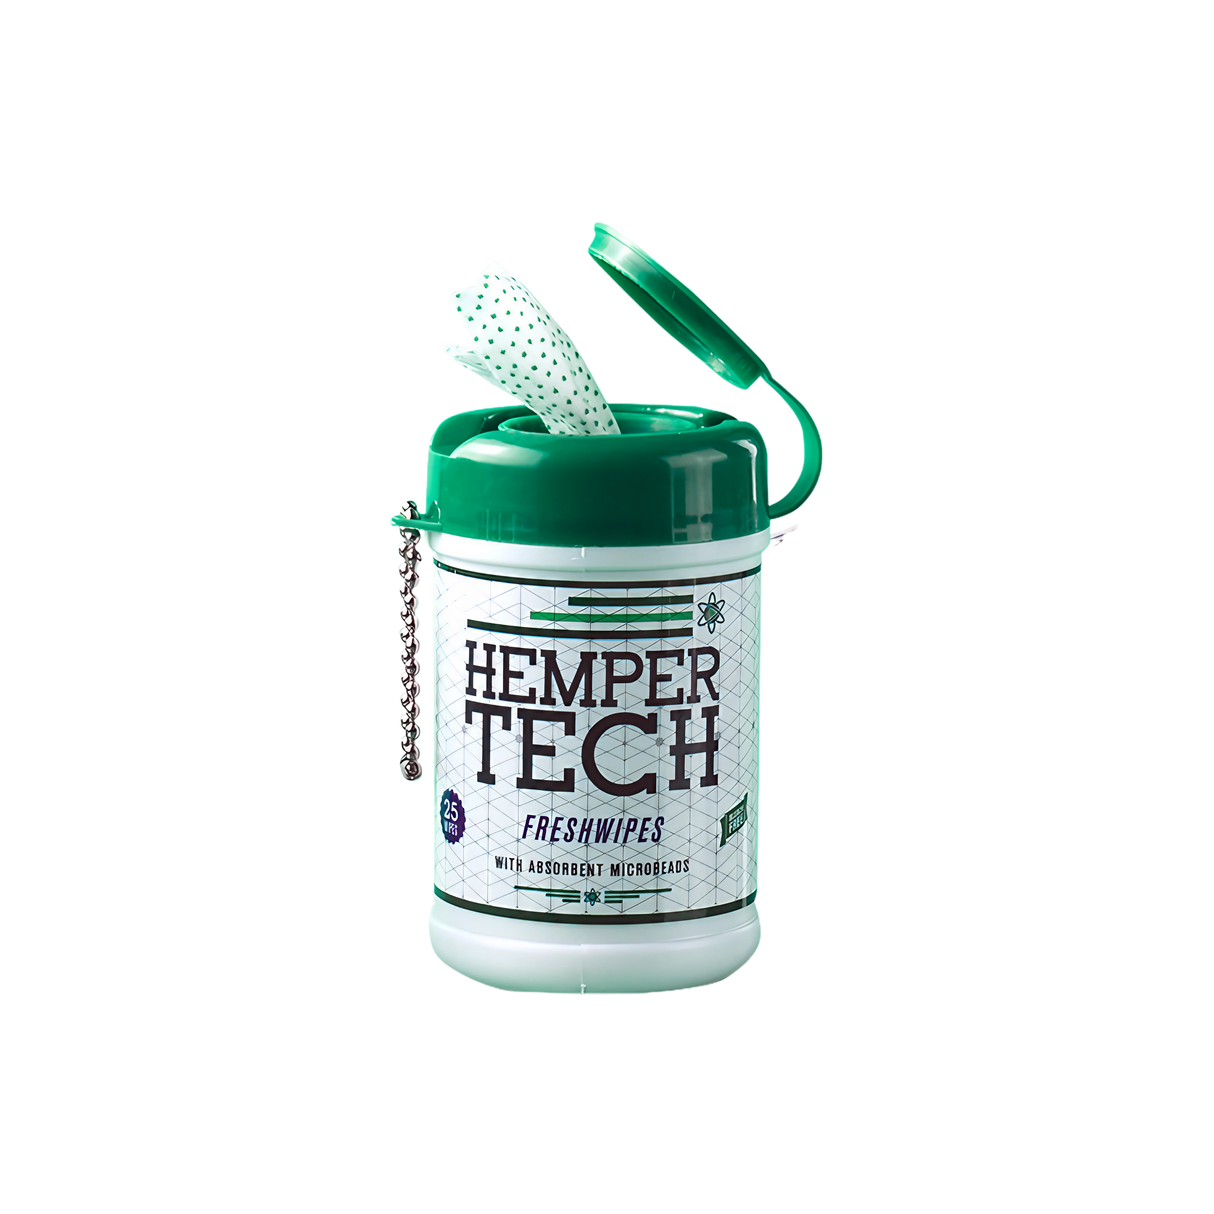 Hemper Tech Freshwipes Bucket with Alcohol Wipes for Cleaning, Front View on White Background